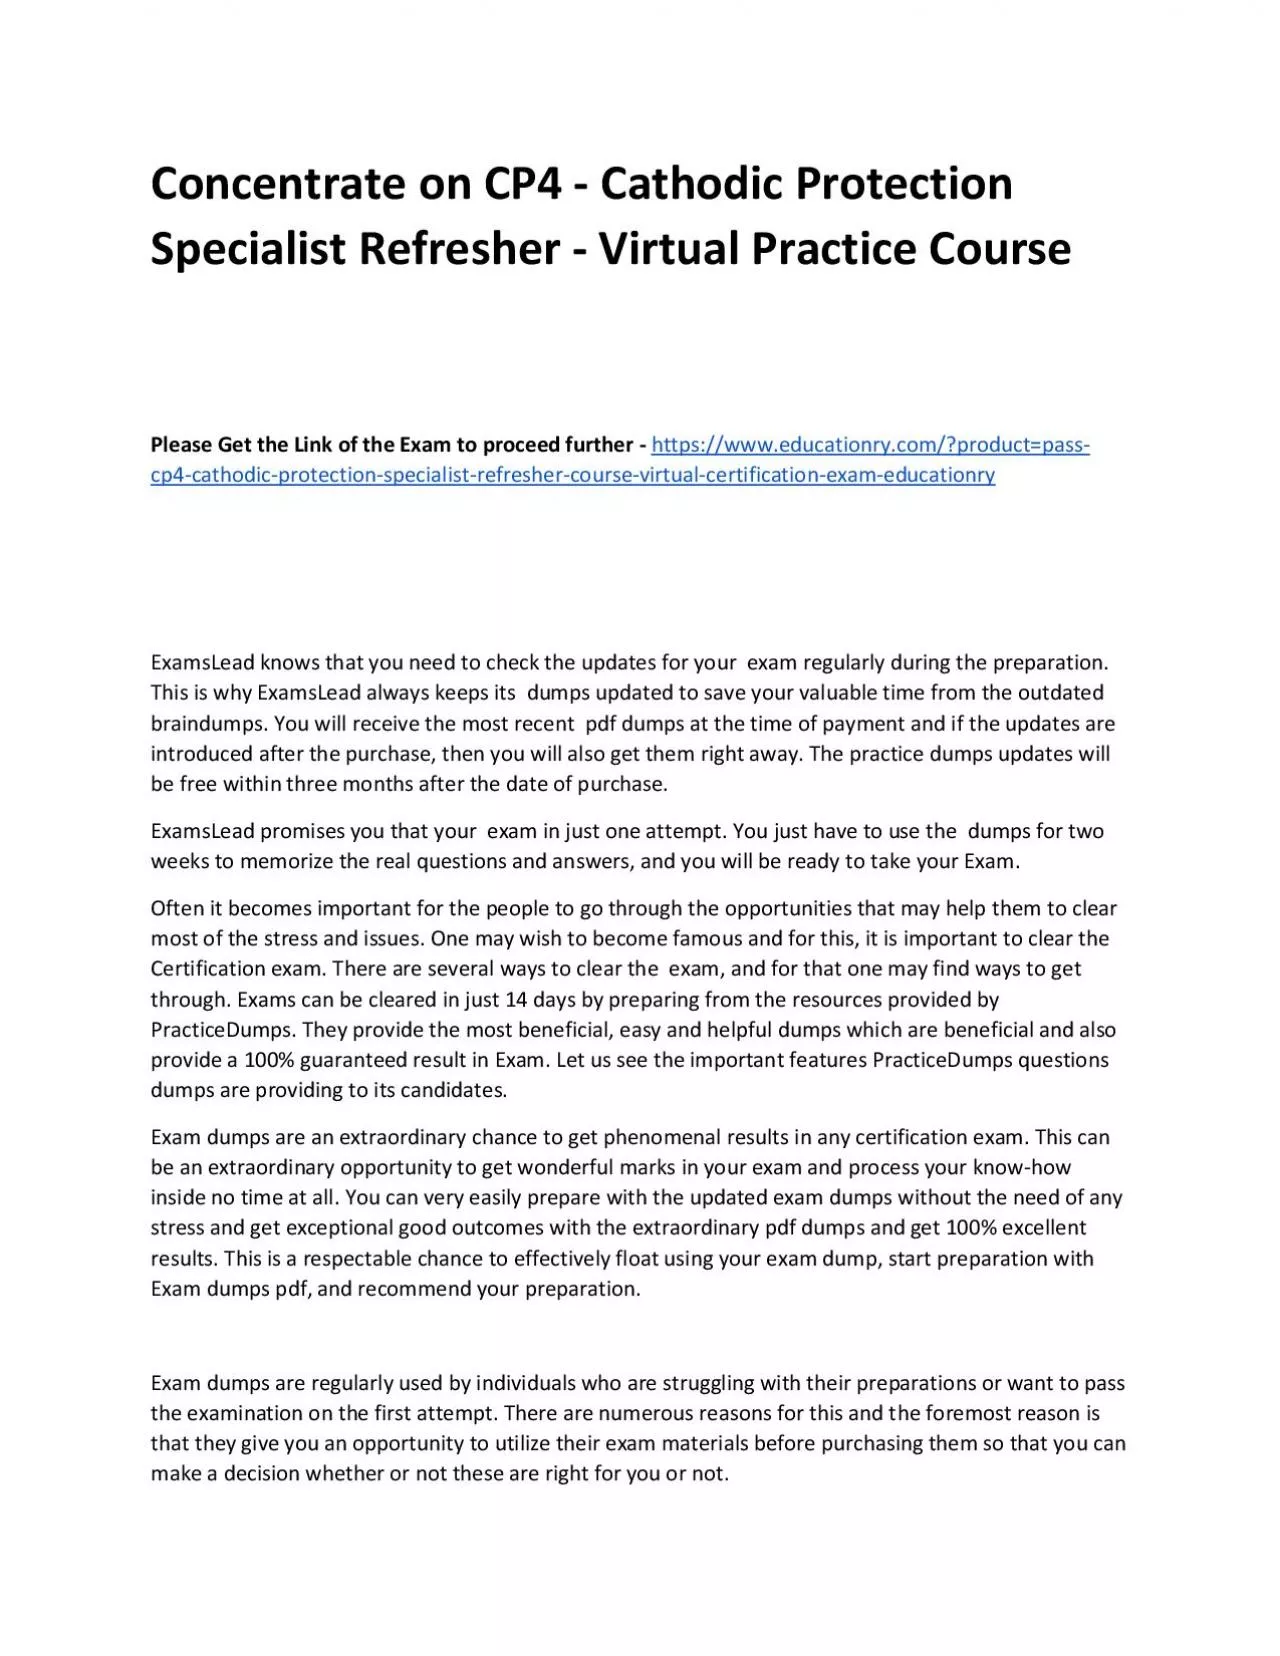 CP4 - Cathodic Protection Specialist Refresher Course - Virtual